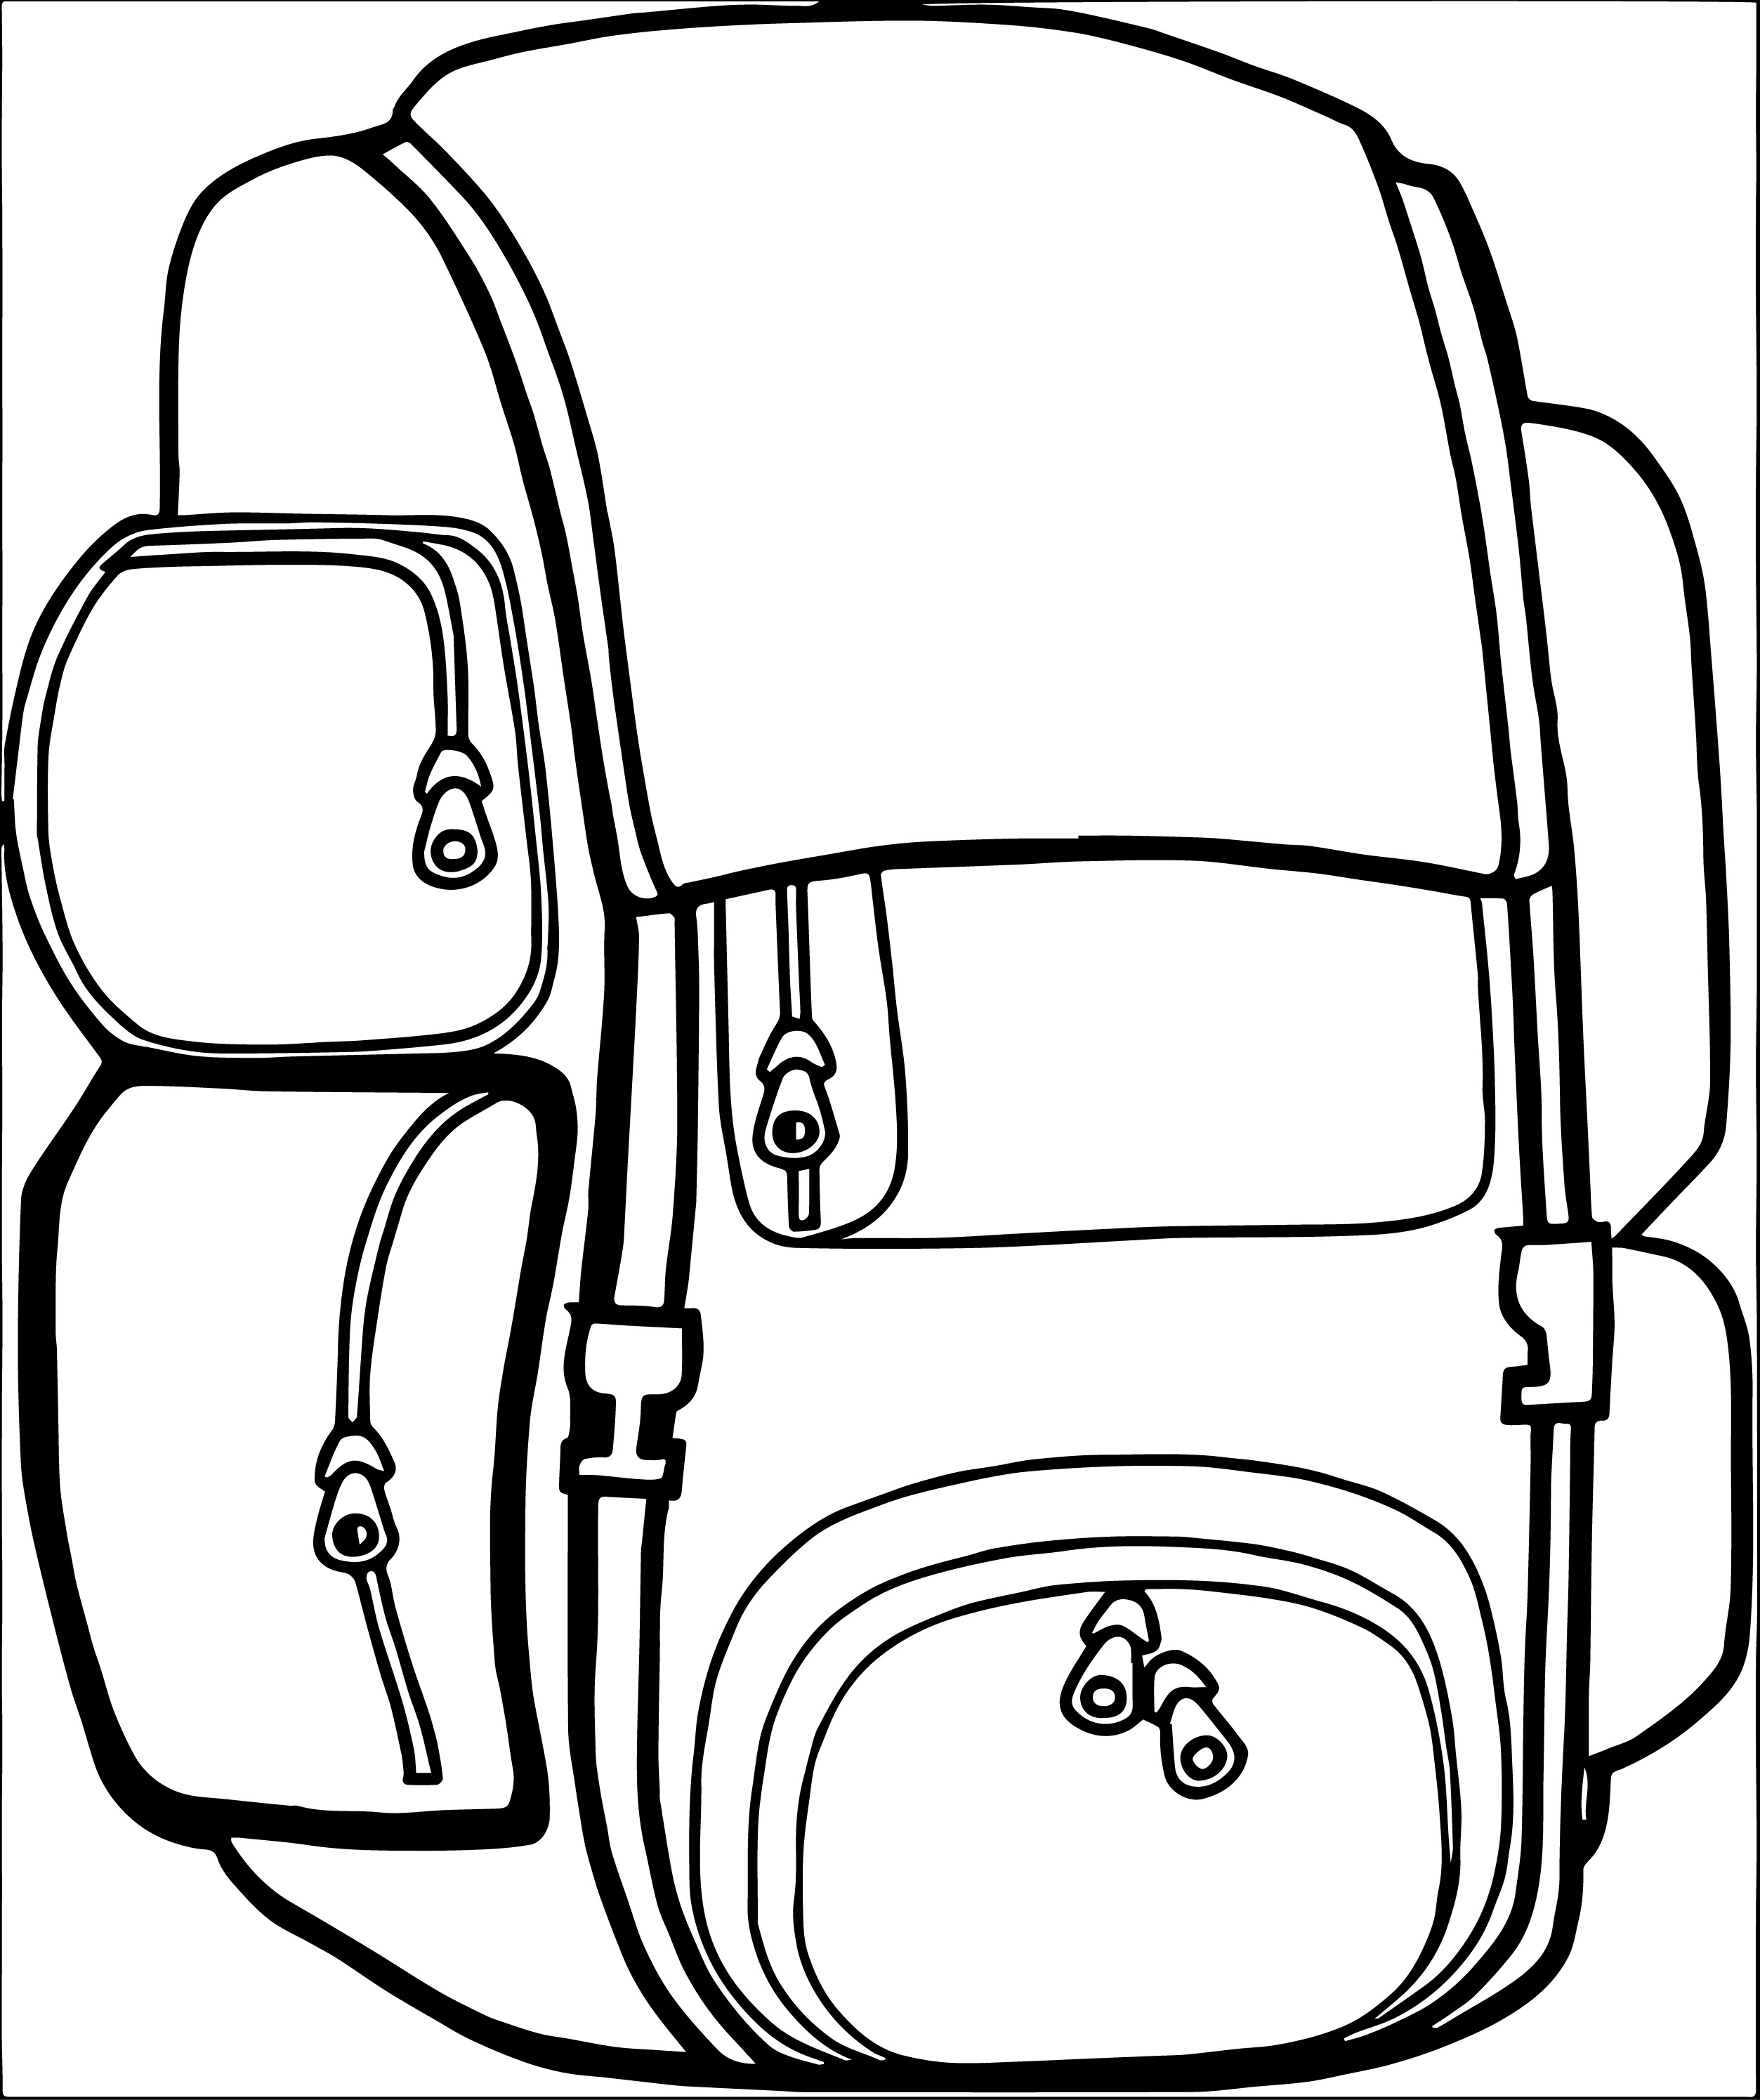 backpack-coloring-page-coloring-pages